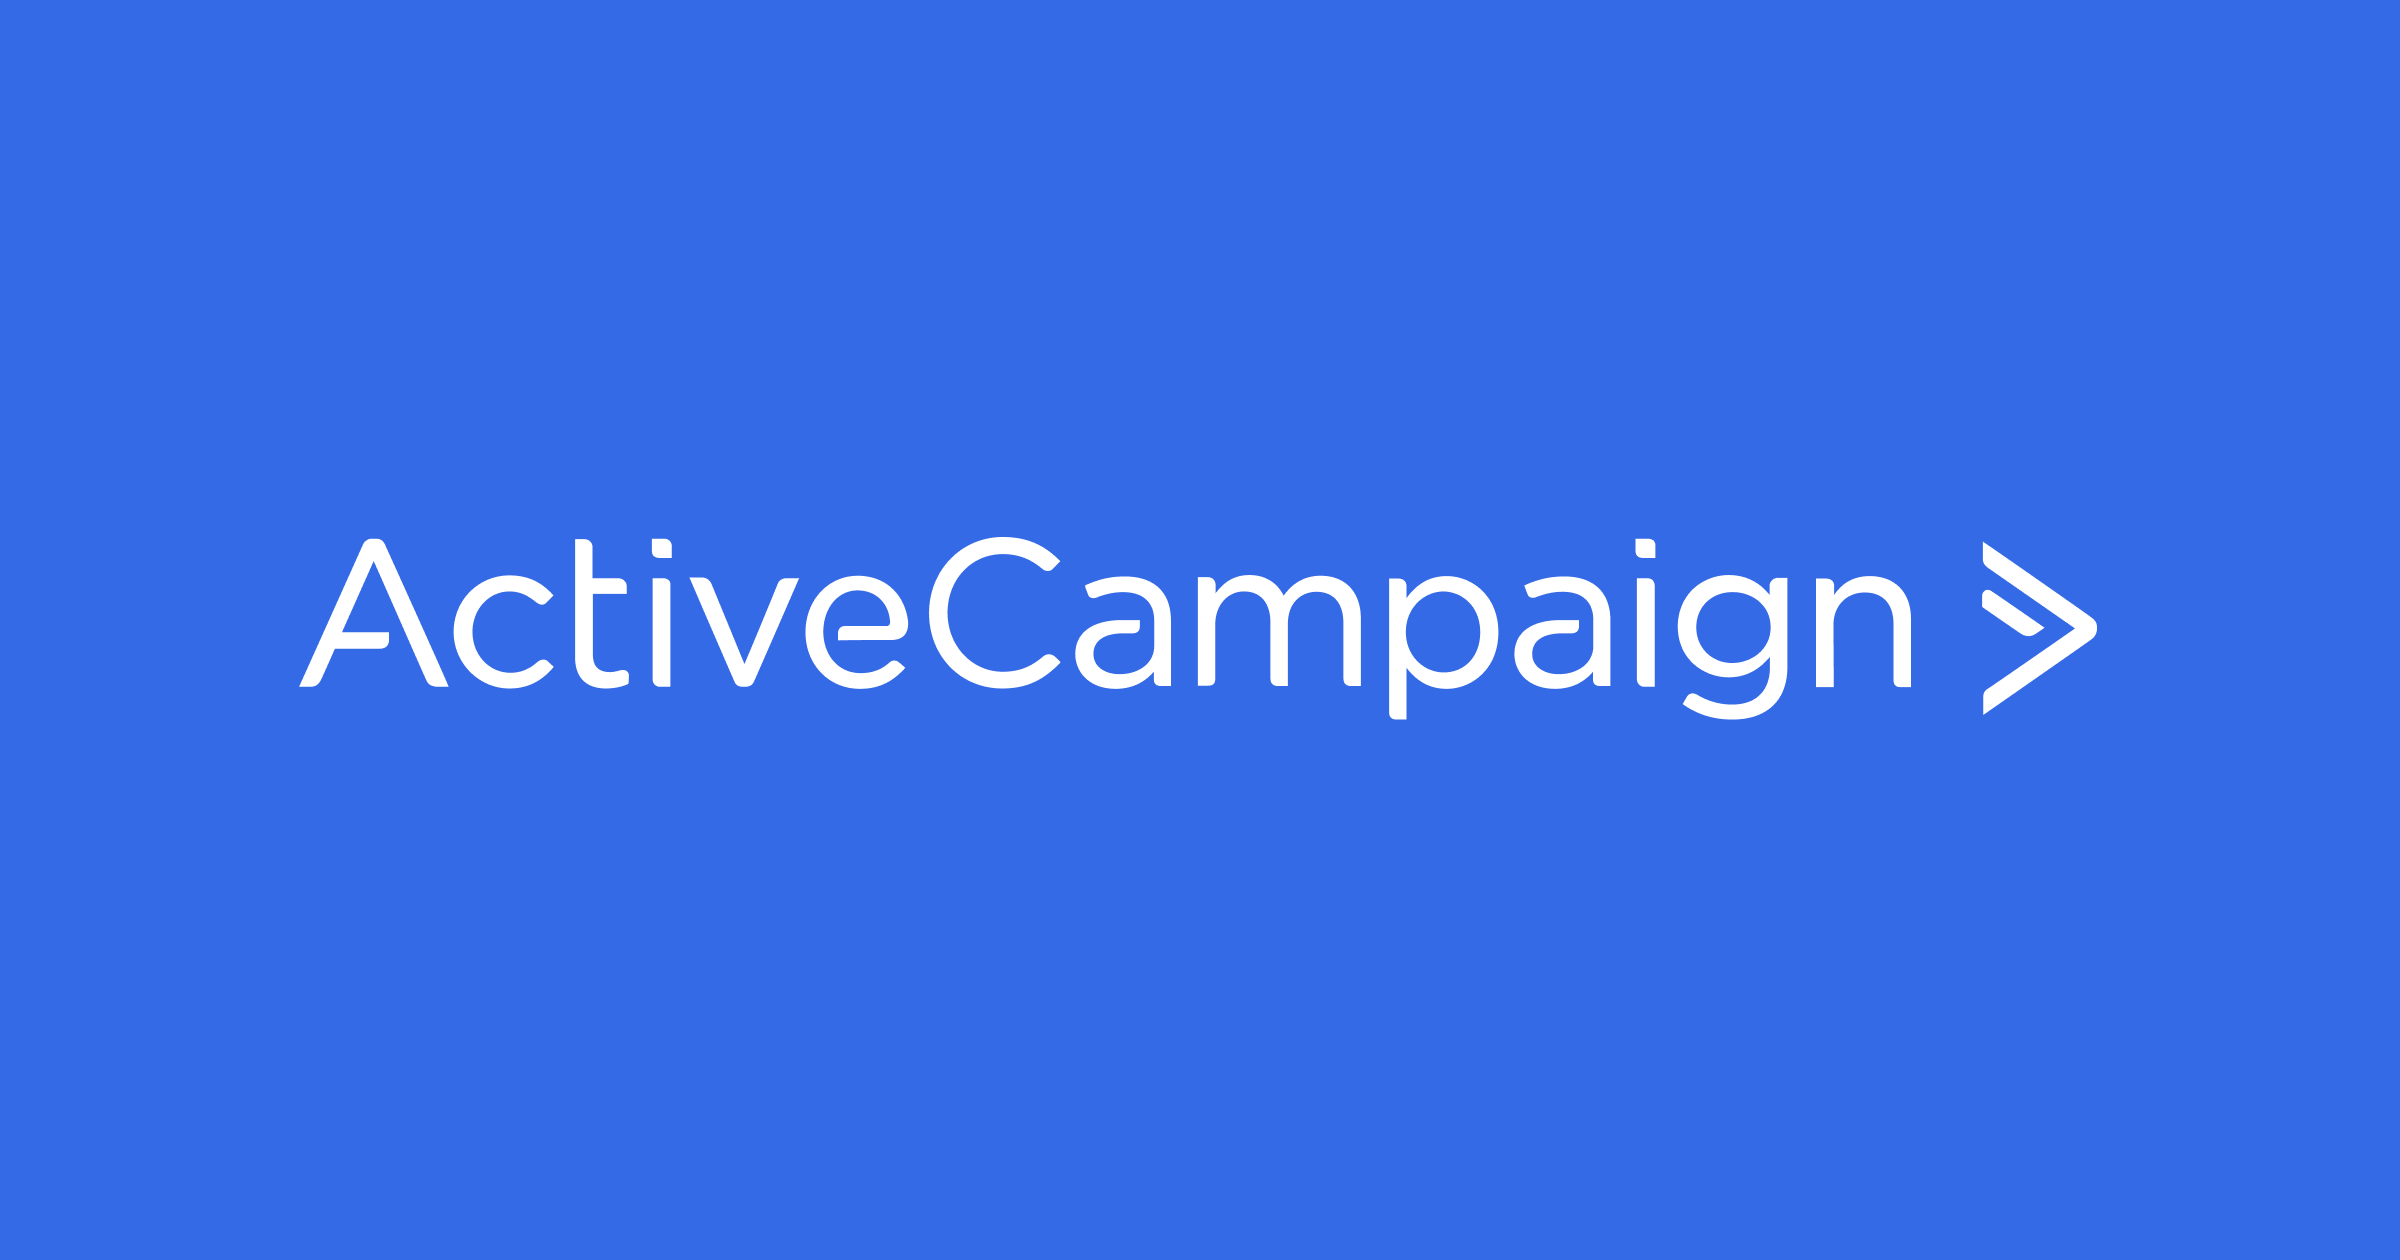 ACTIVECAMPAIGN users